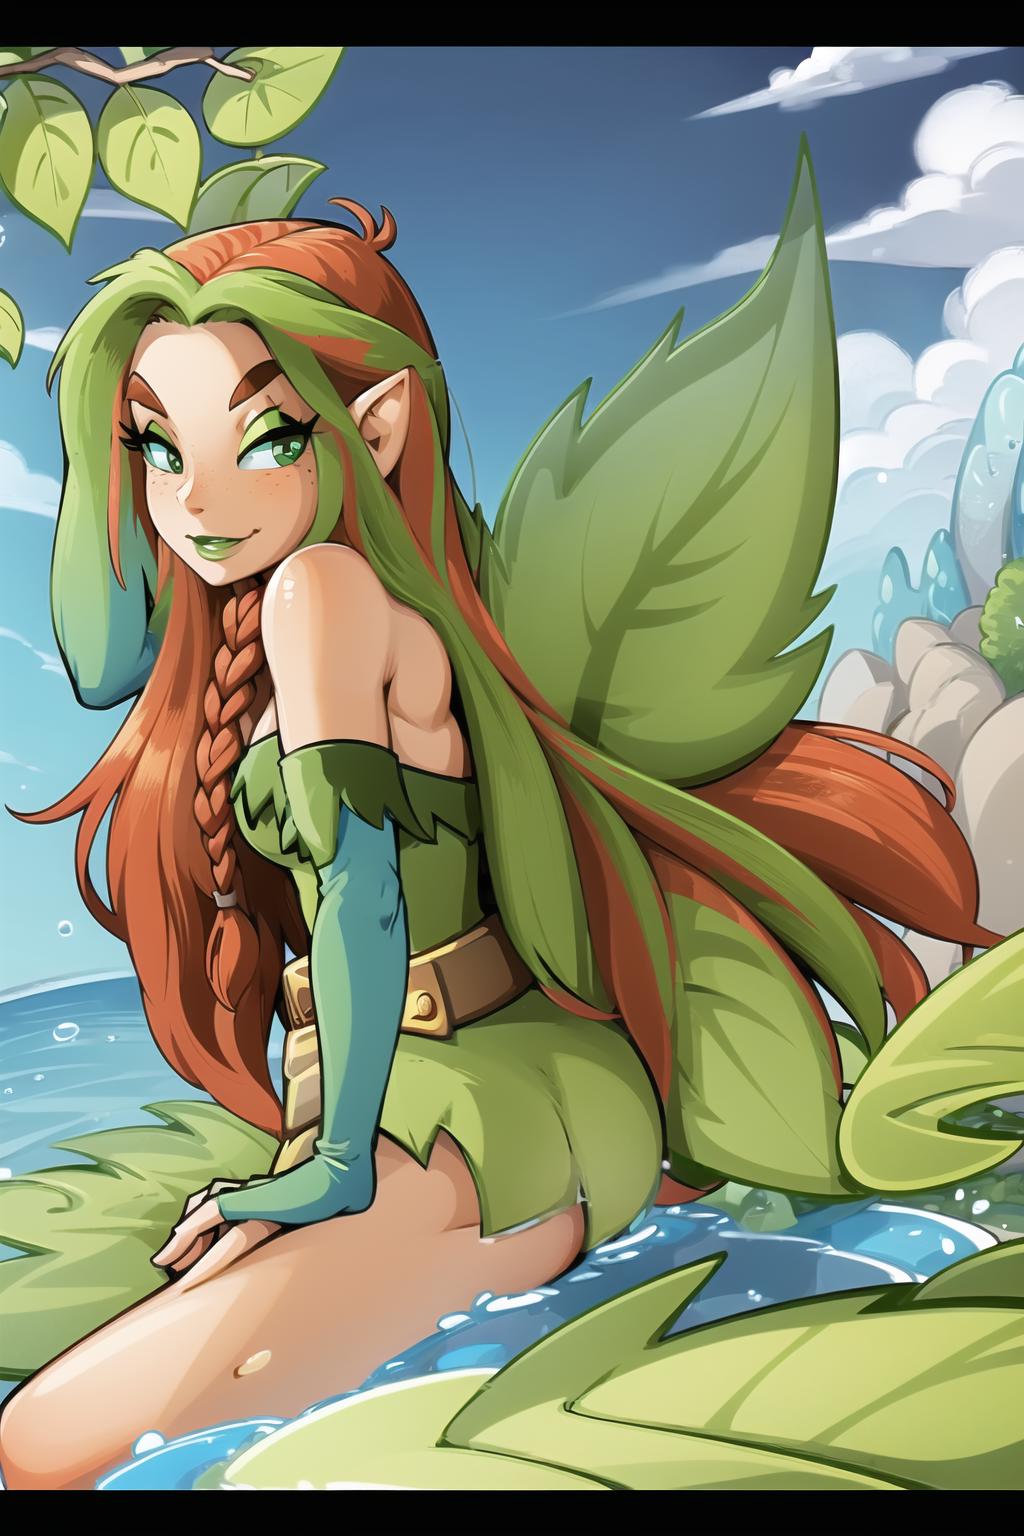 Illusen, Earth Faerie - Neopets image by FaeFlan